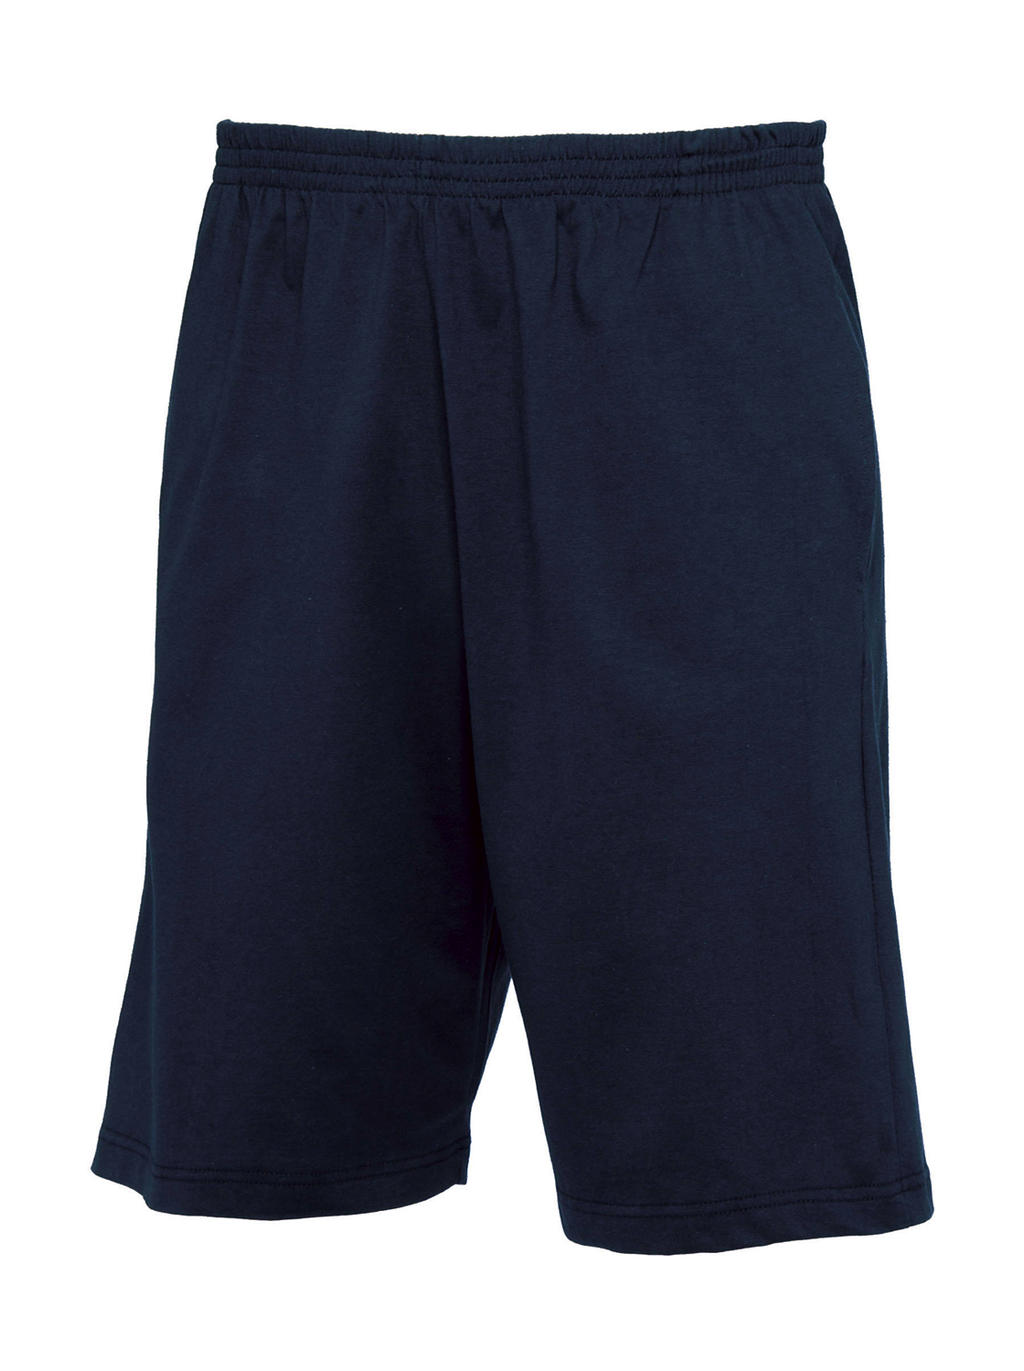  Shorts Move in Farbe Navy